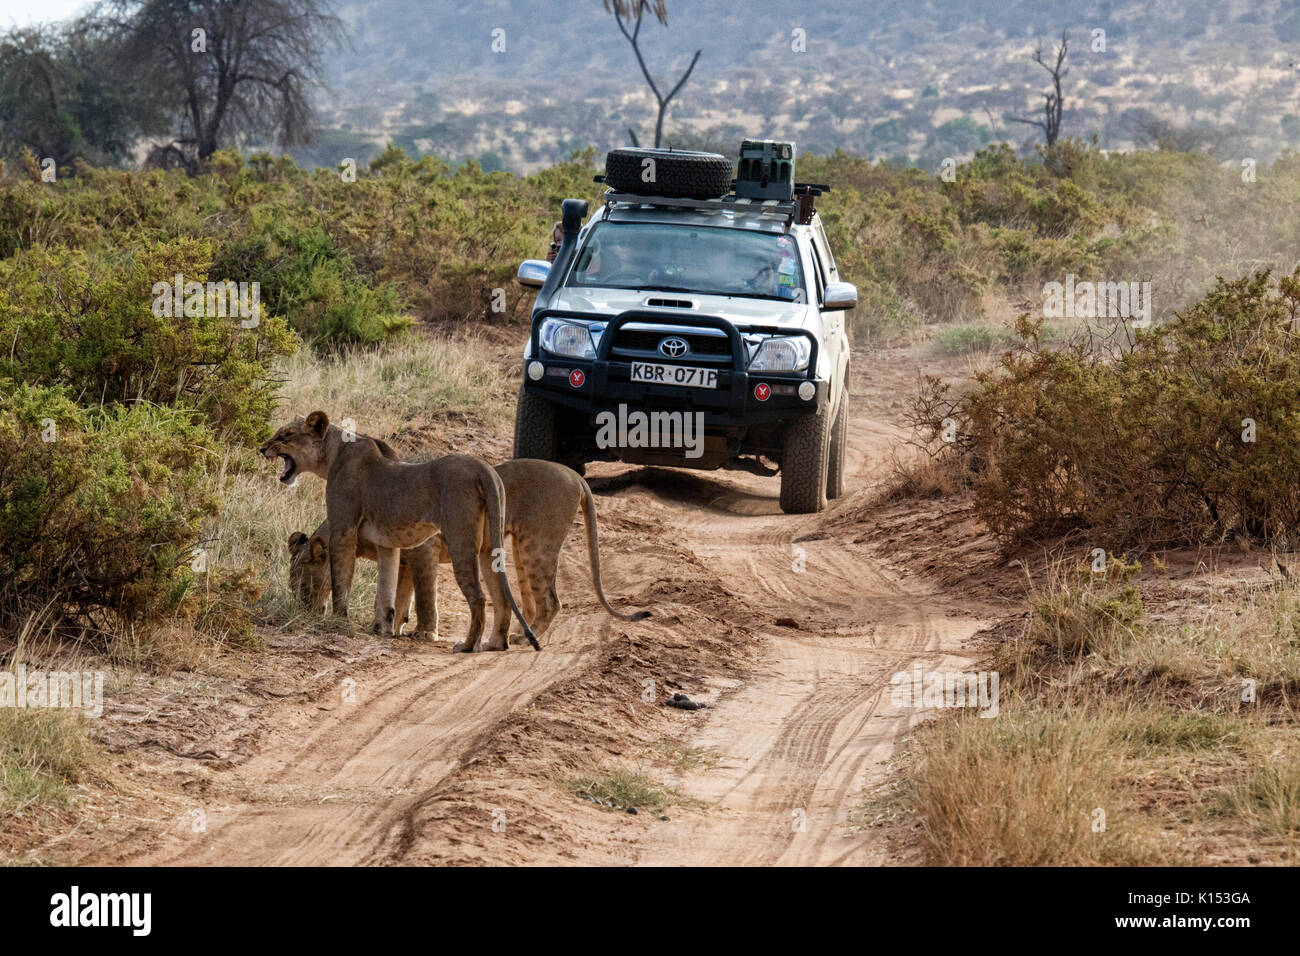 Road blocked by lions for a safari rig filled with tourists in the Samburu National Reserve, Kenya, Africa. Stock Photo